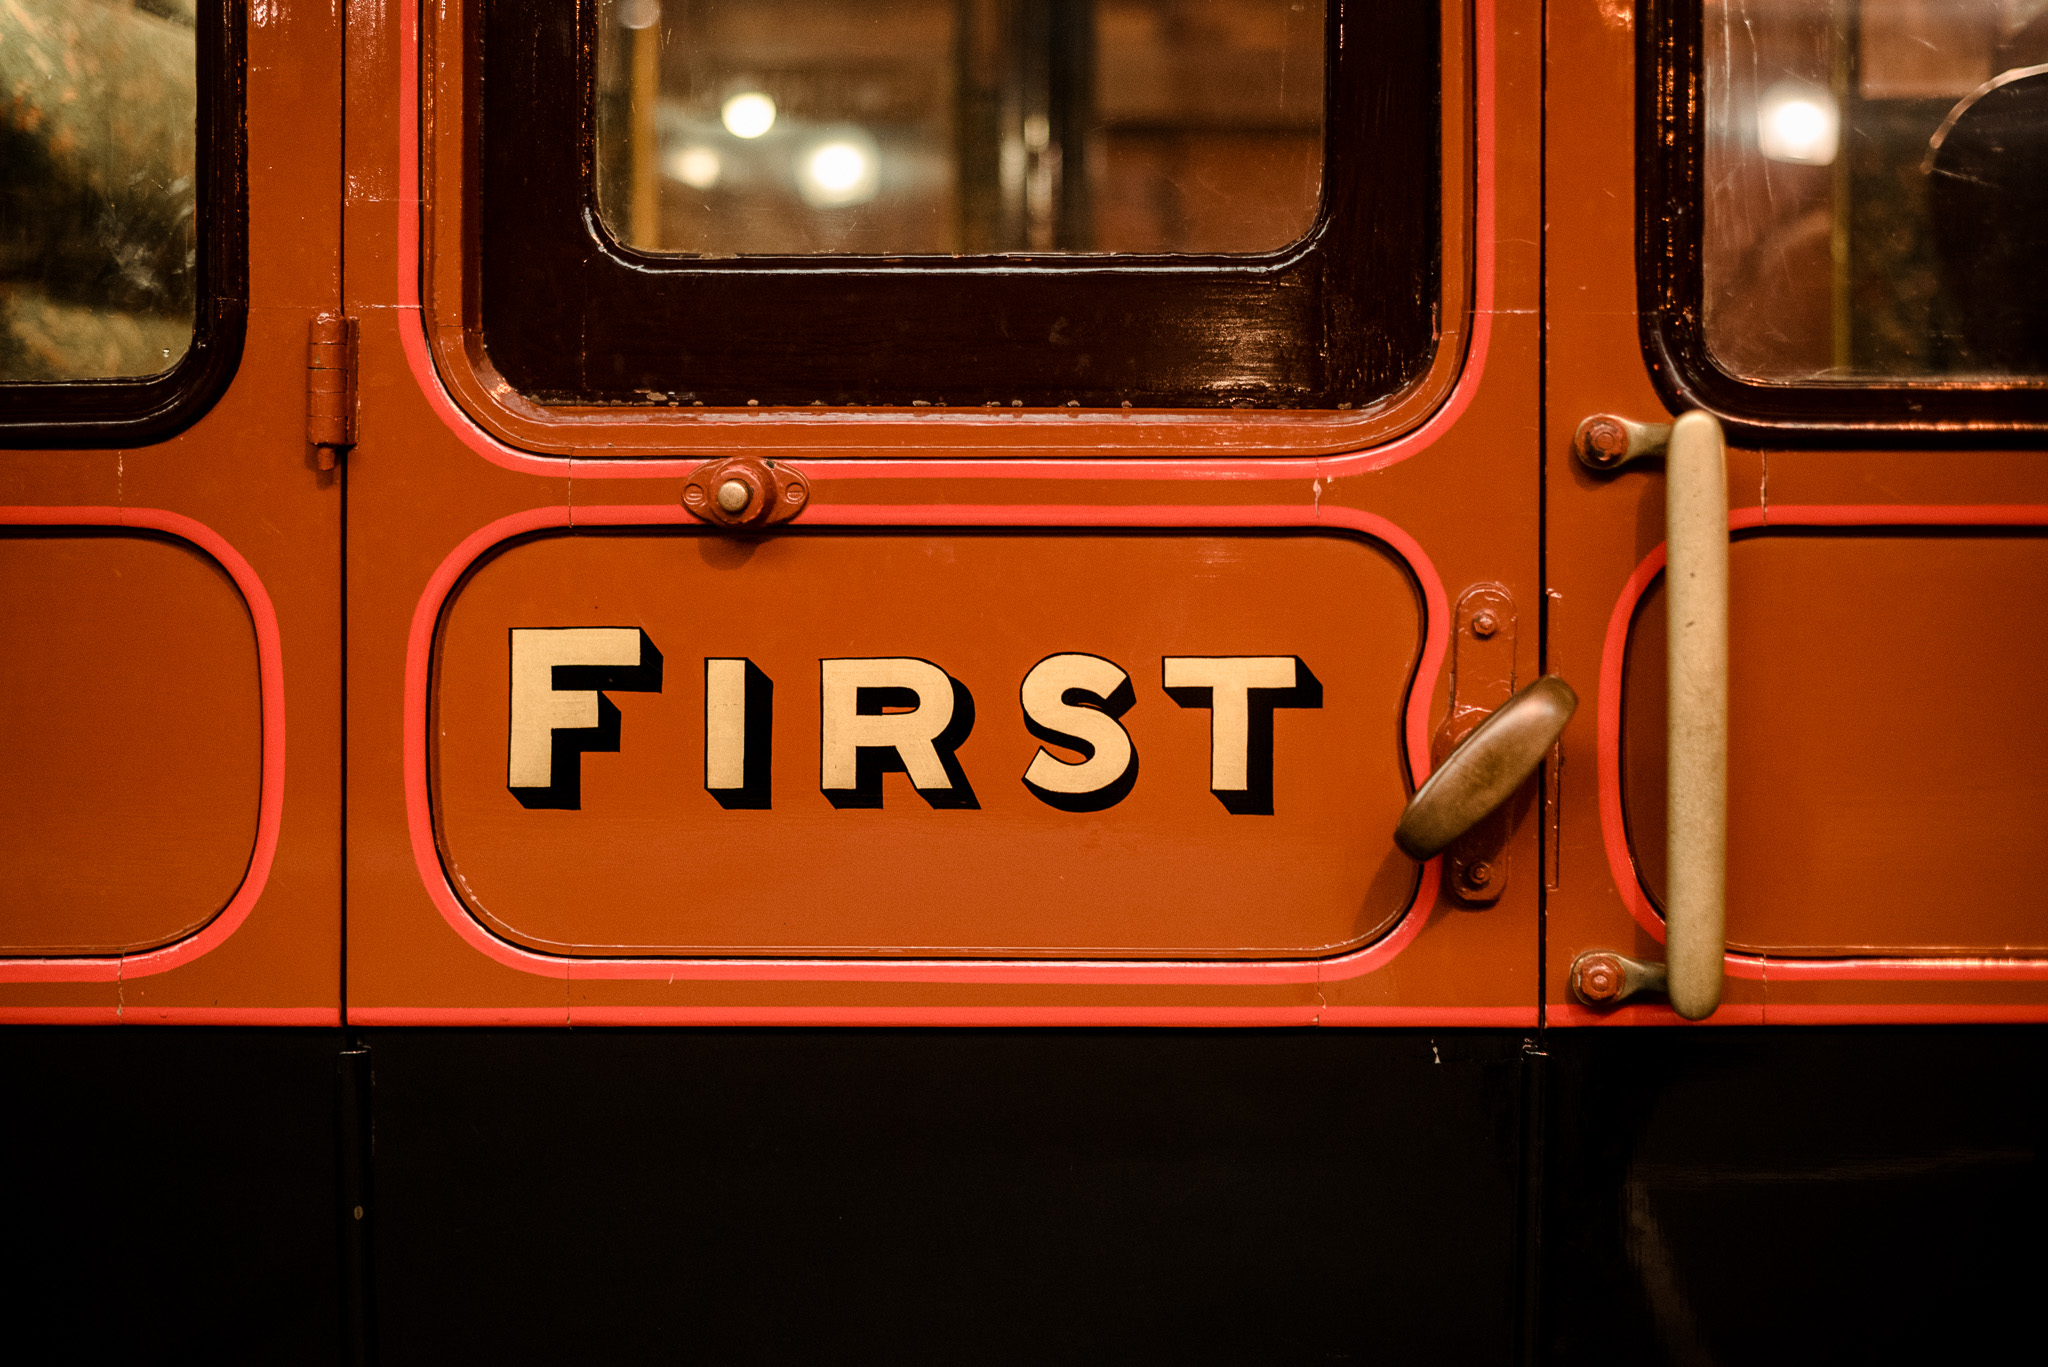 A Railway Museum Wedding with DIY Touches and Vintage Style